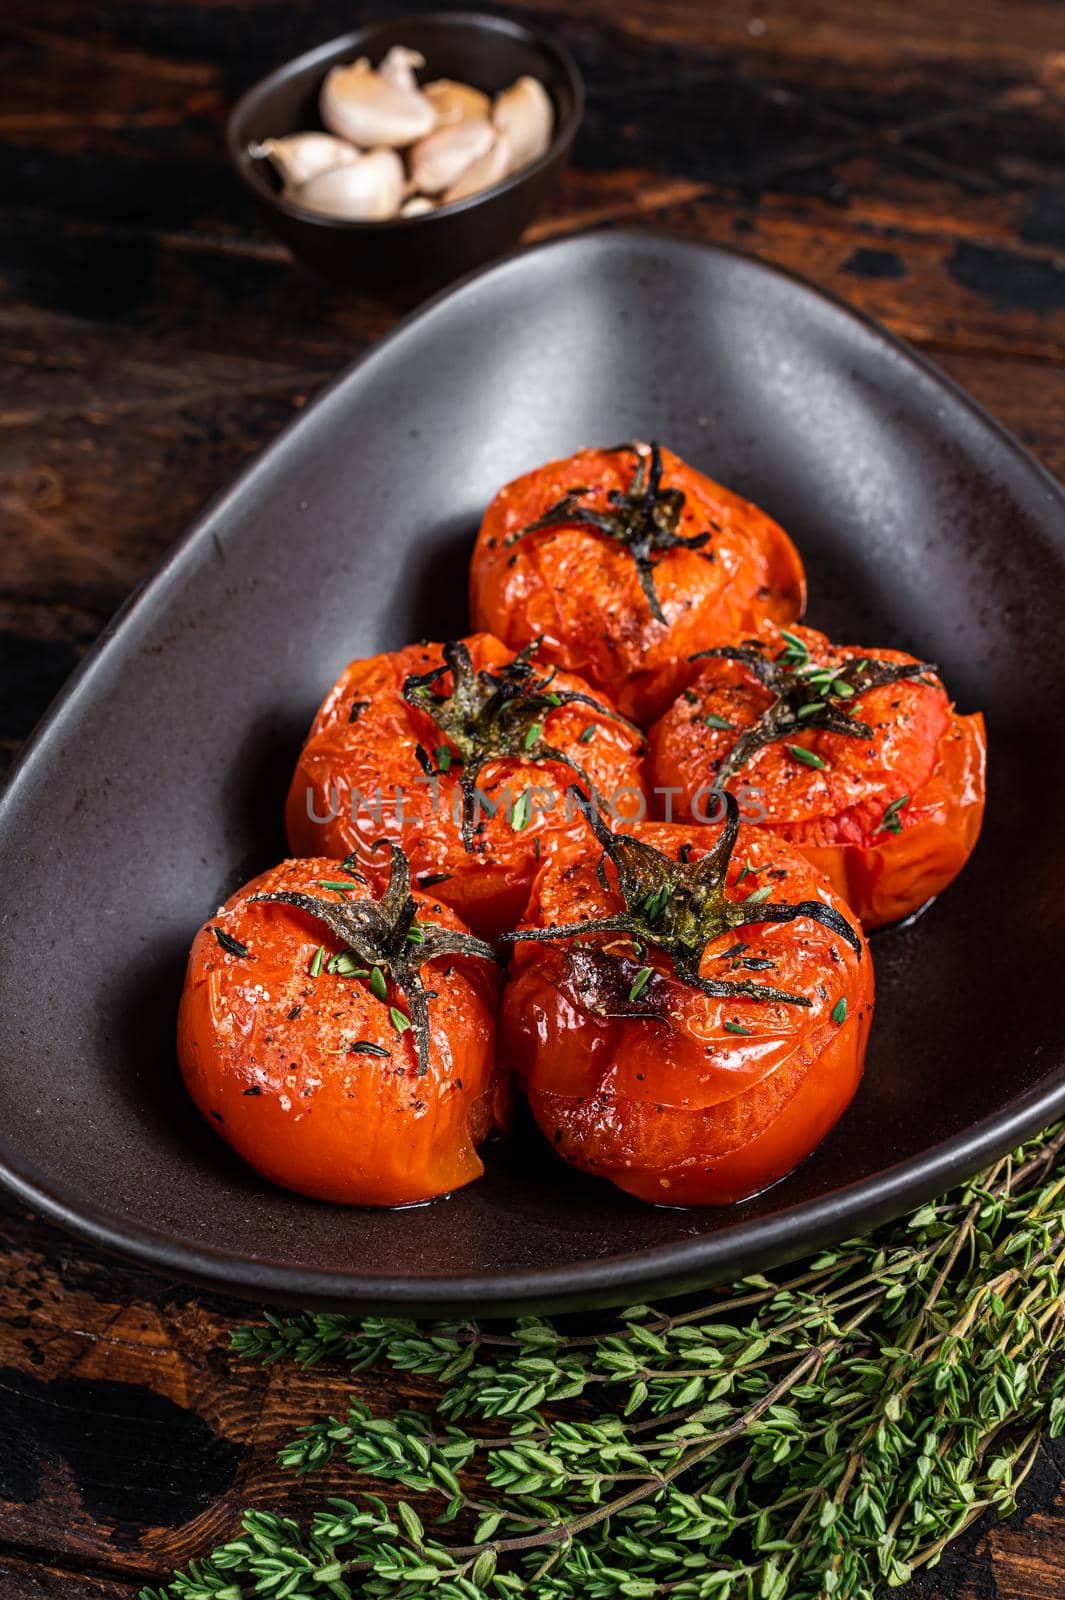 Oven Roasted cherry tomatoes with thyme and garlic in a plate. Dark wooden background. Top view.